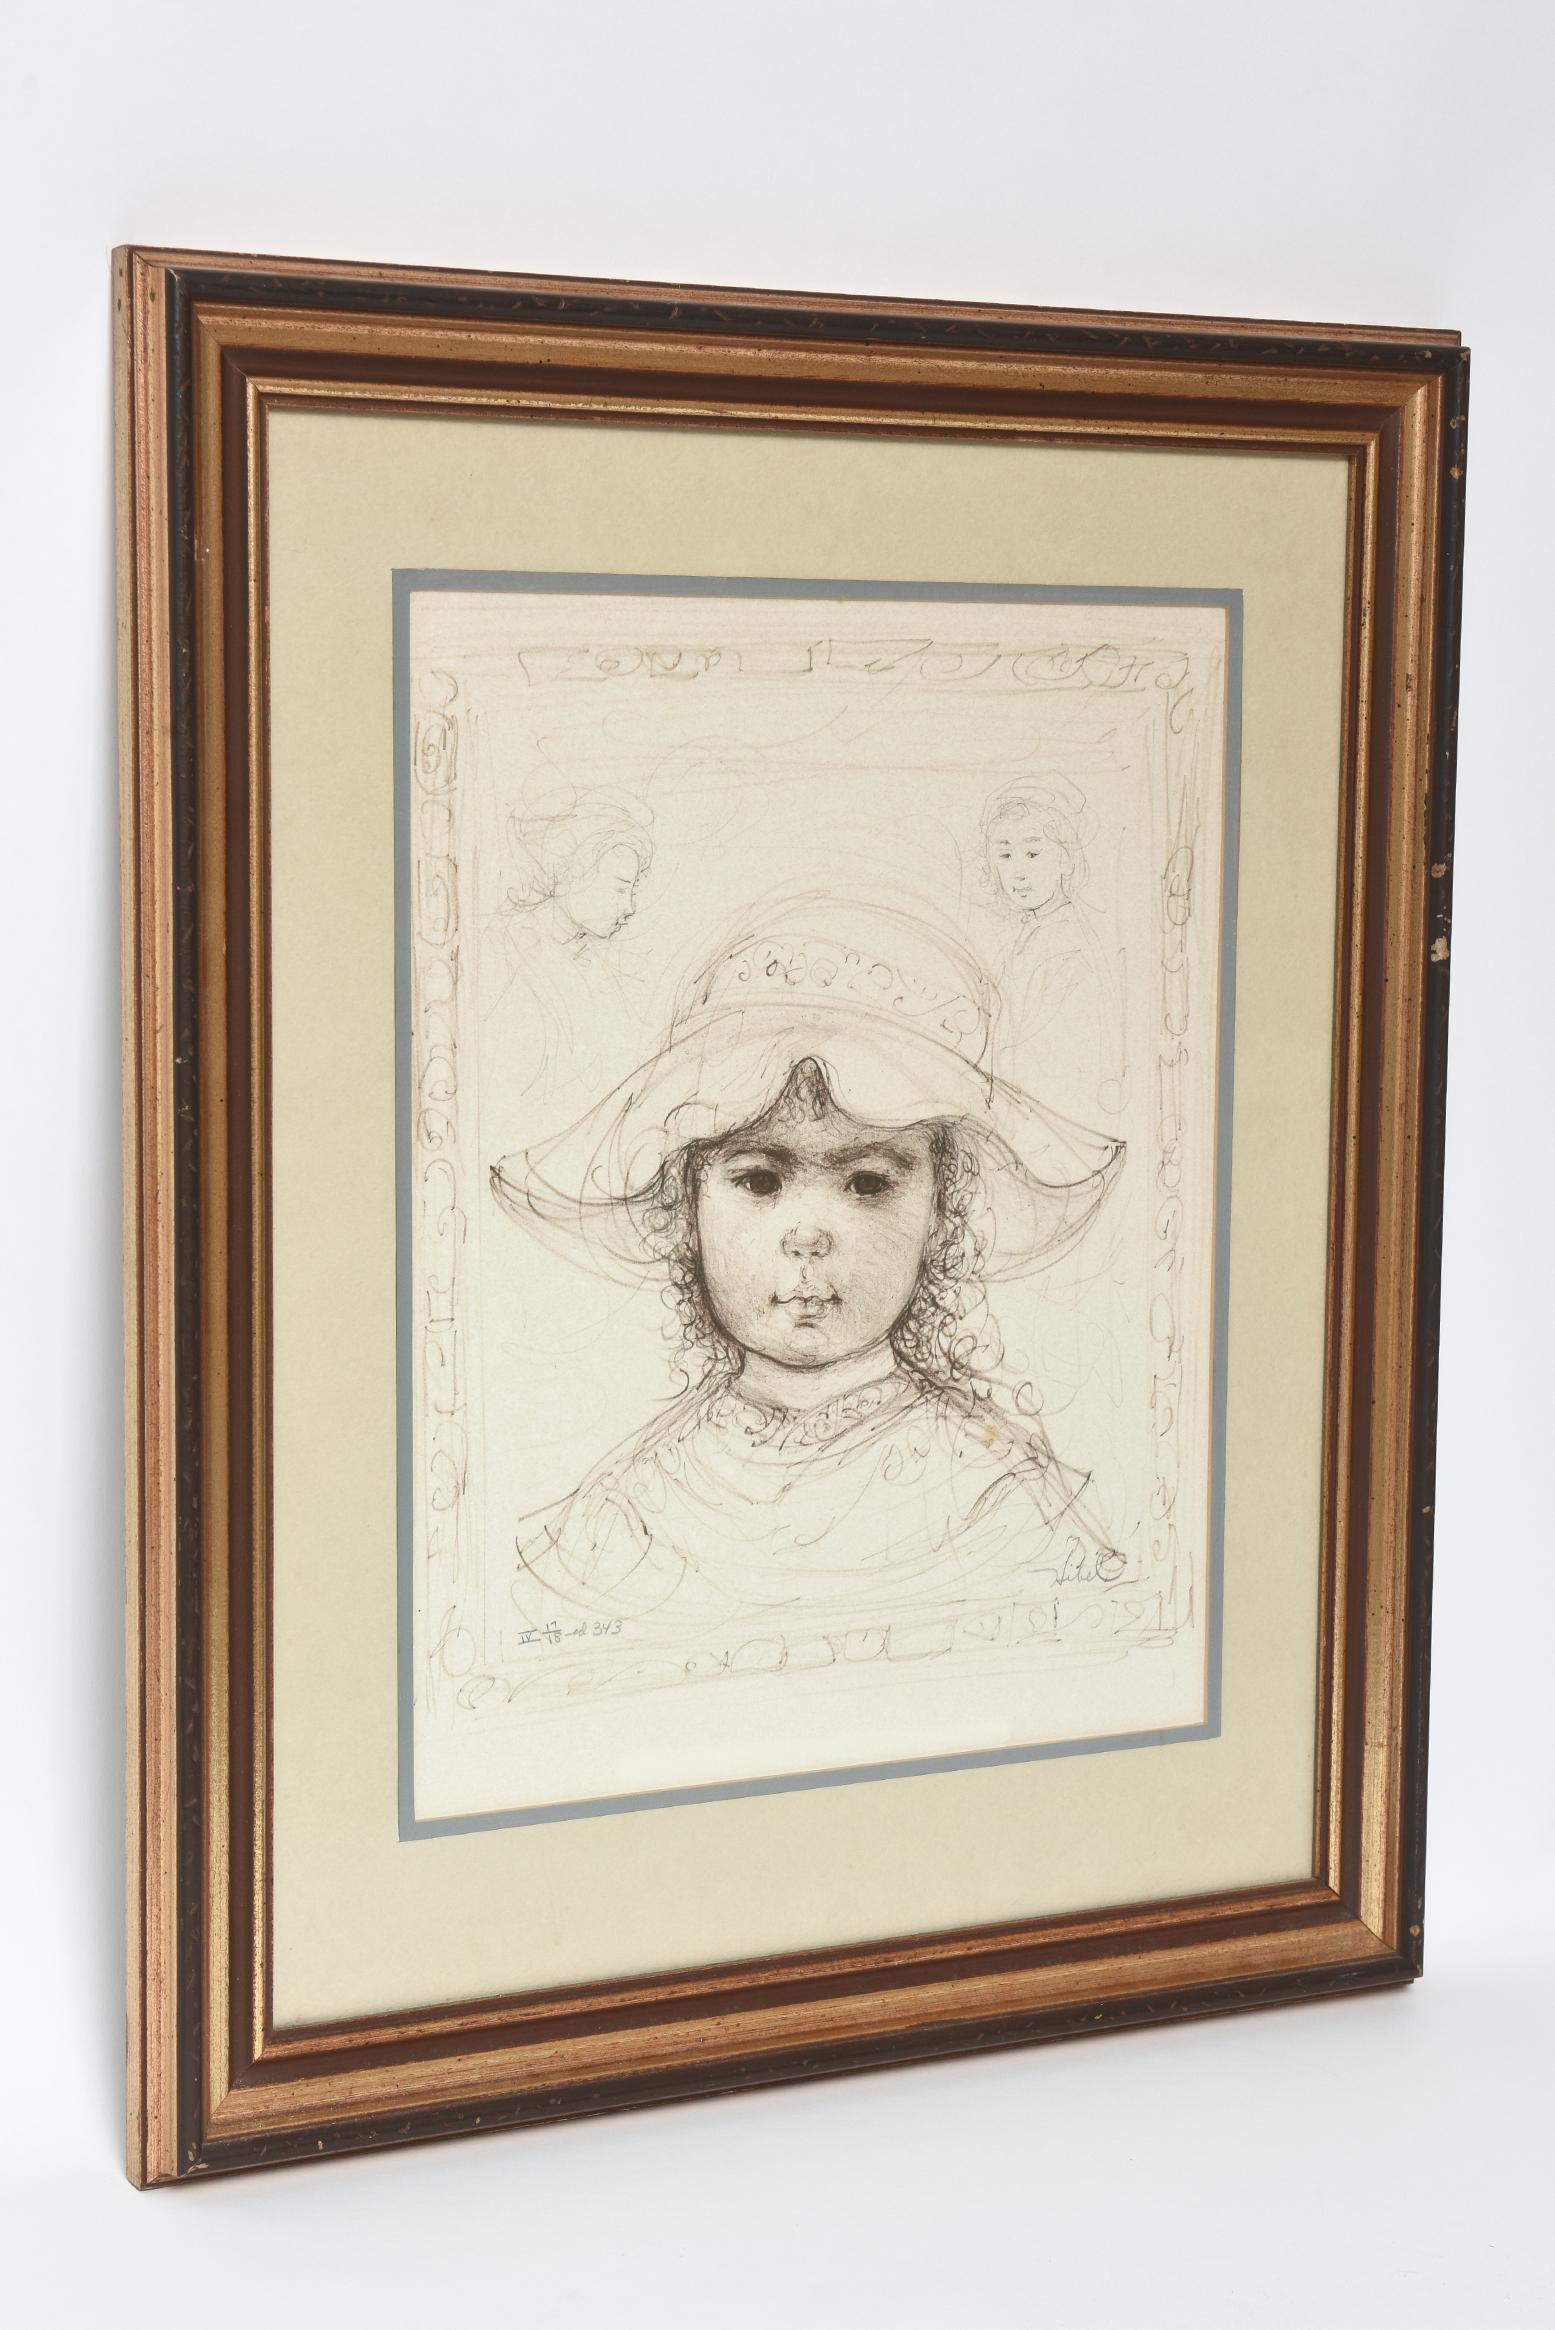 Lithograph print of a young girl wearing a floppy hat by Edna Hibel (American 1917-2014). Signed bottom right 